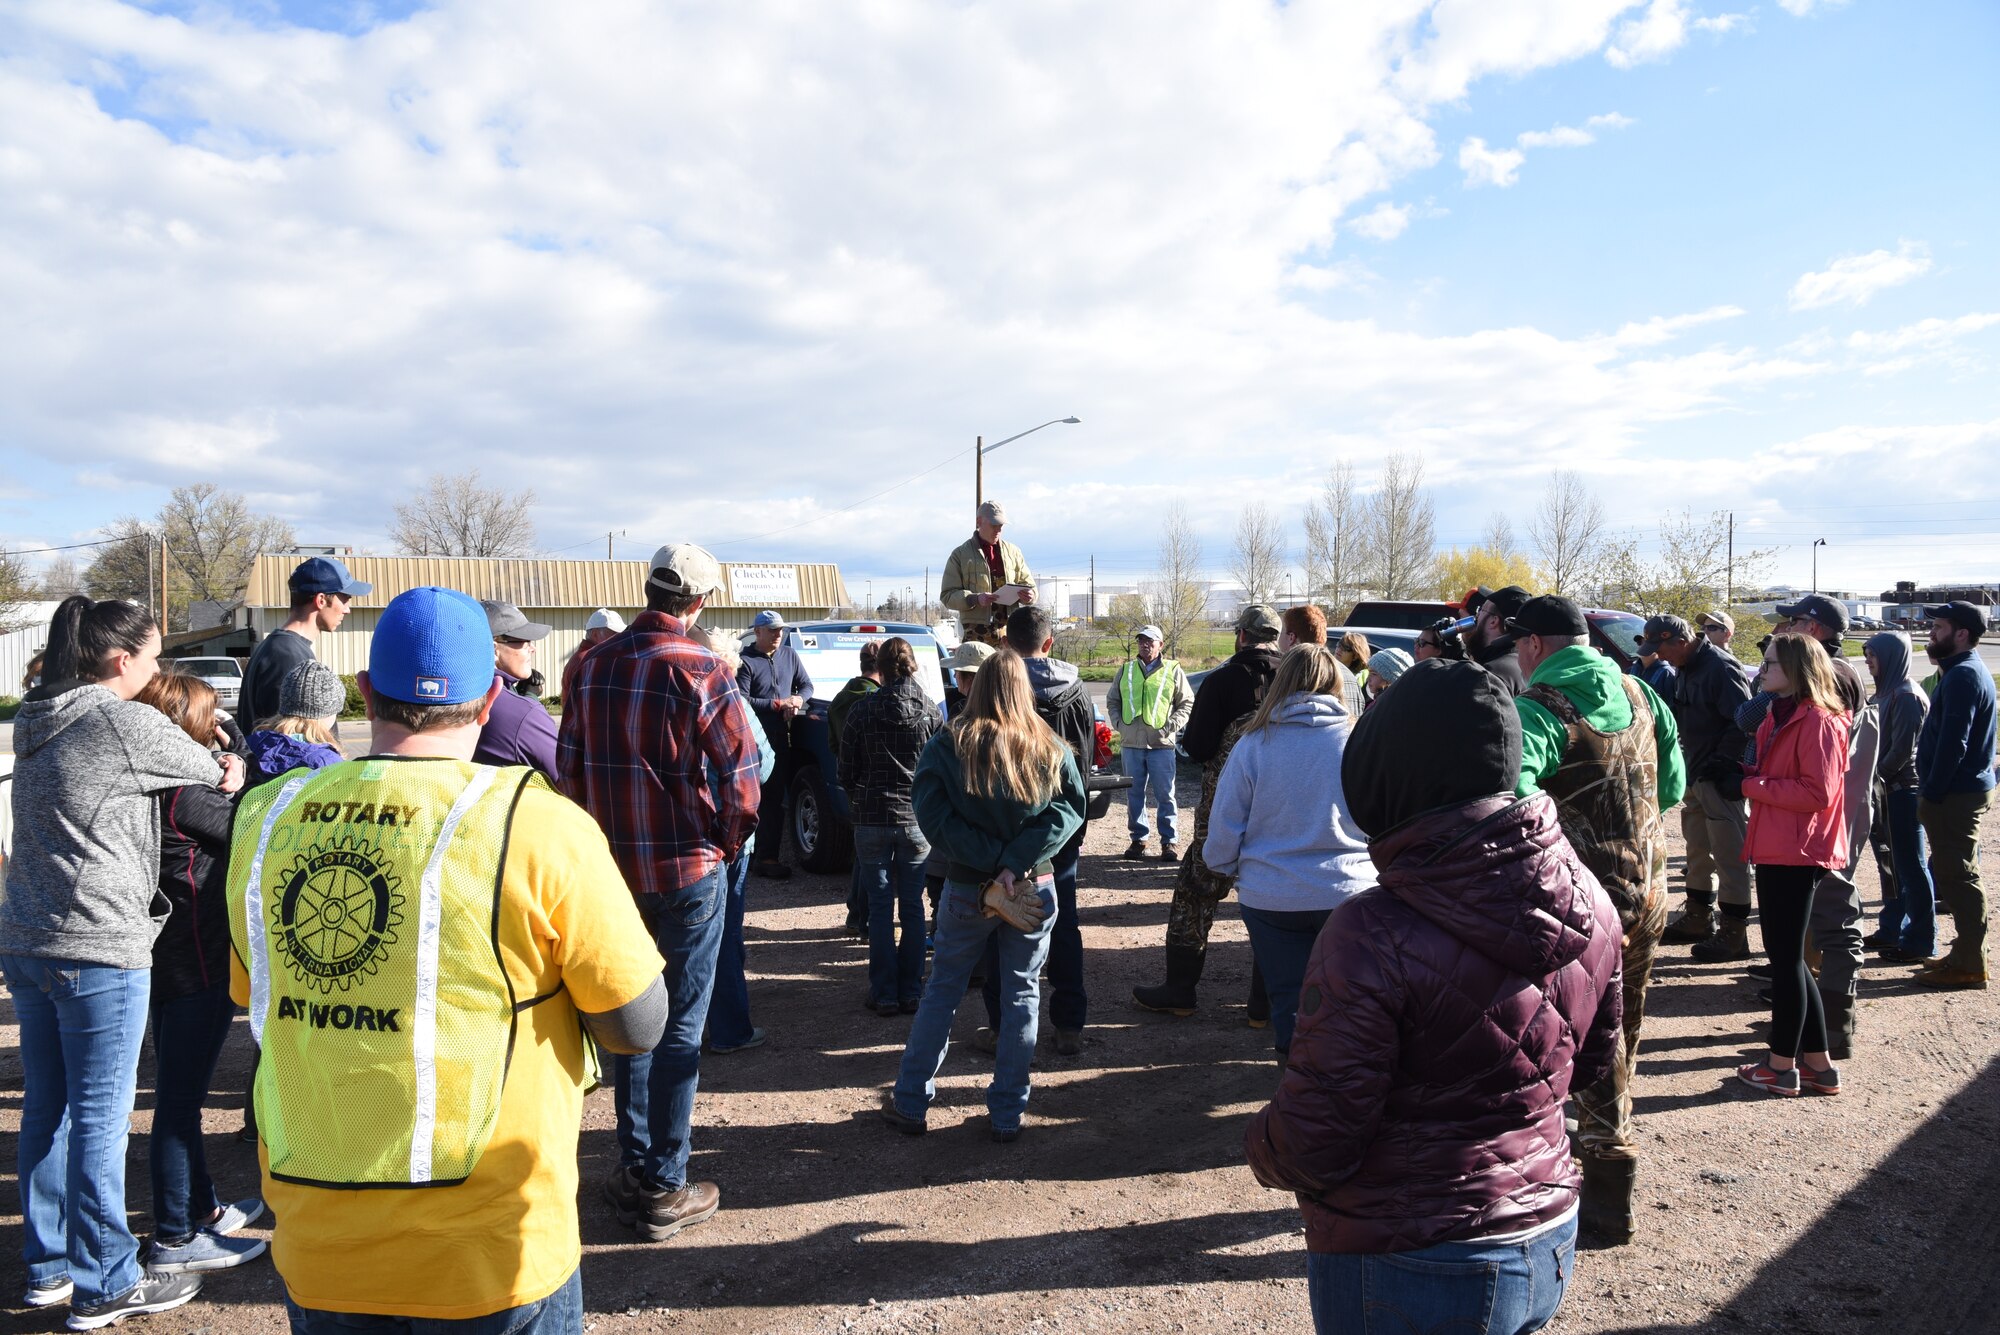 Brent Lathrop of the National Conservancy Group addresses a group of volunteers before beginning the clean up effort of the Crow Creek in Cheyenne, Wyo., May 11. More than fifty volunteers came out as part of the Crow Creek Revival project aimed at bringing the creek closer to its original state.